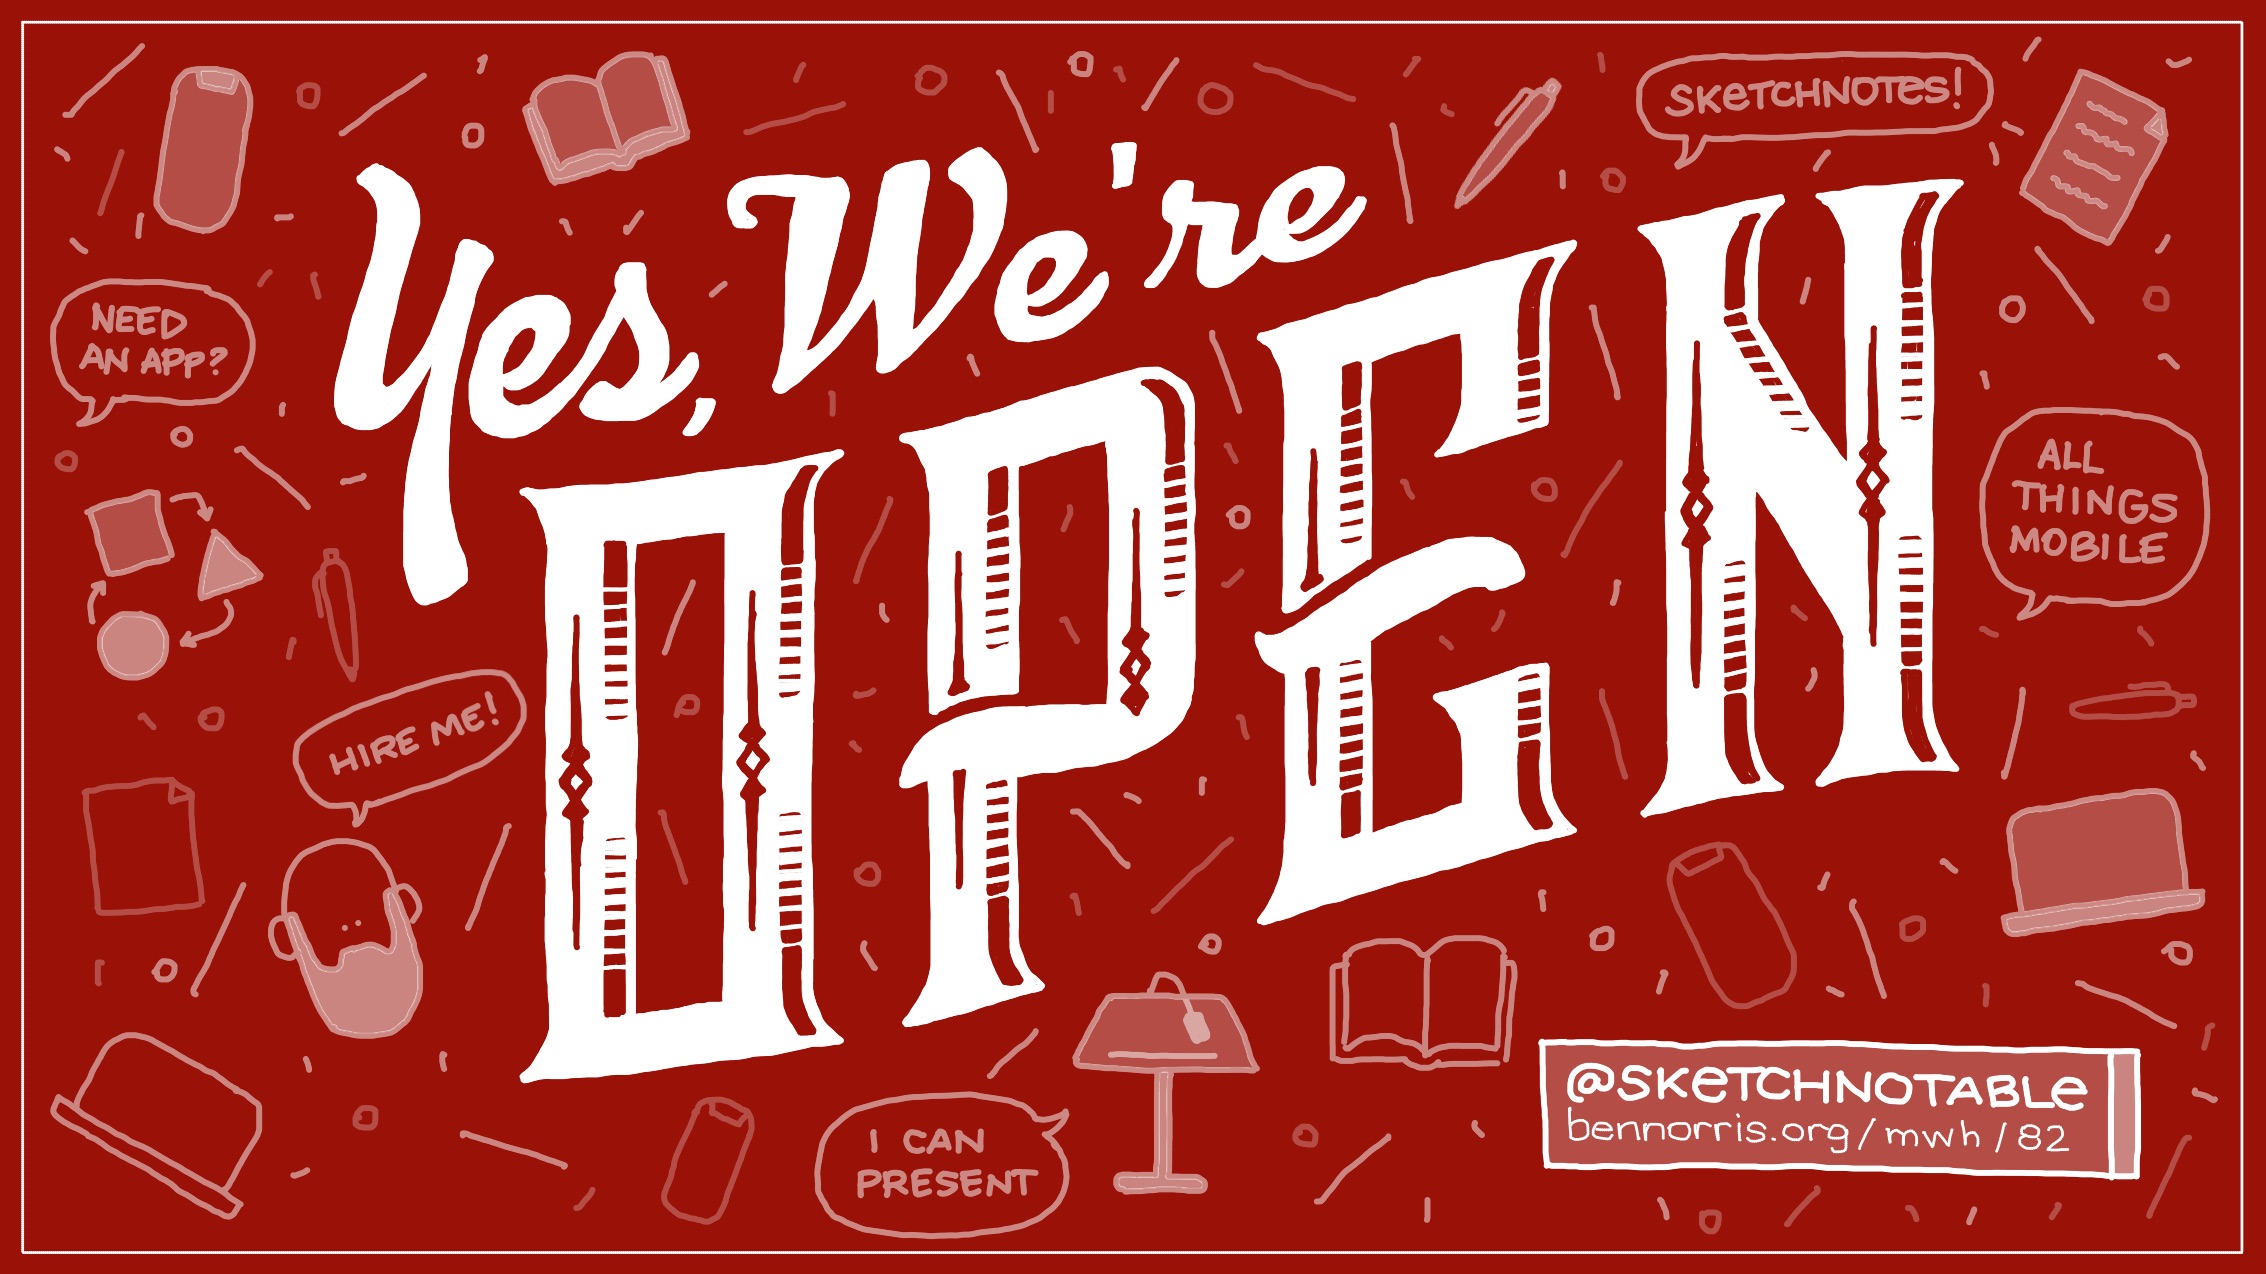 Yes, we’re open